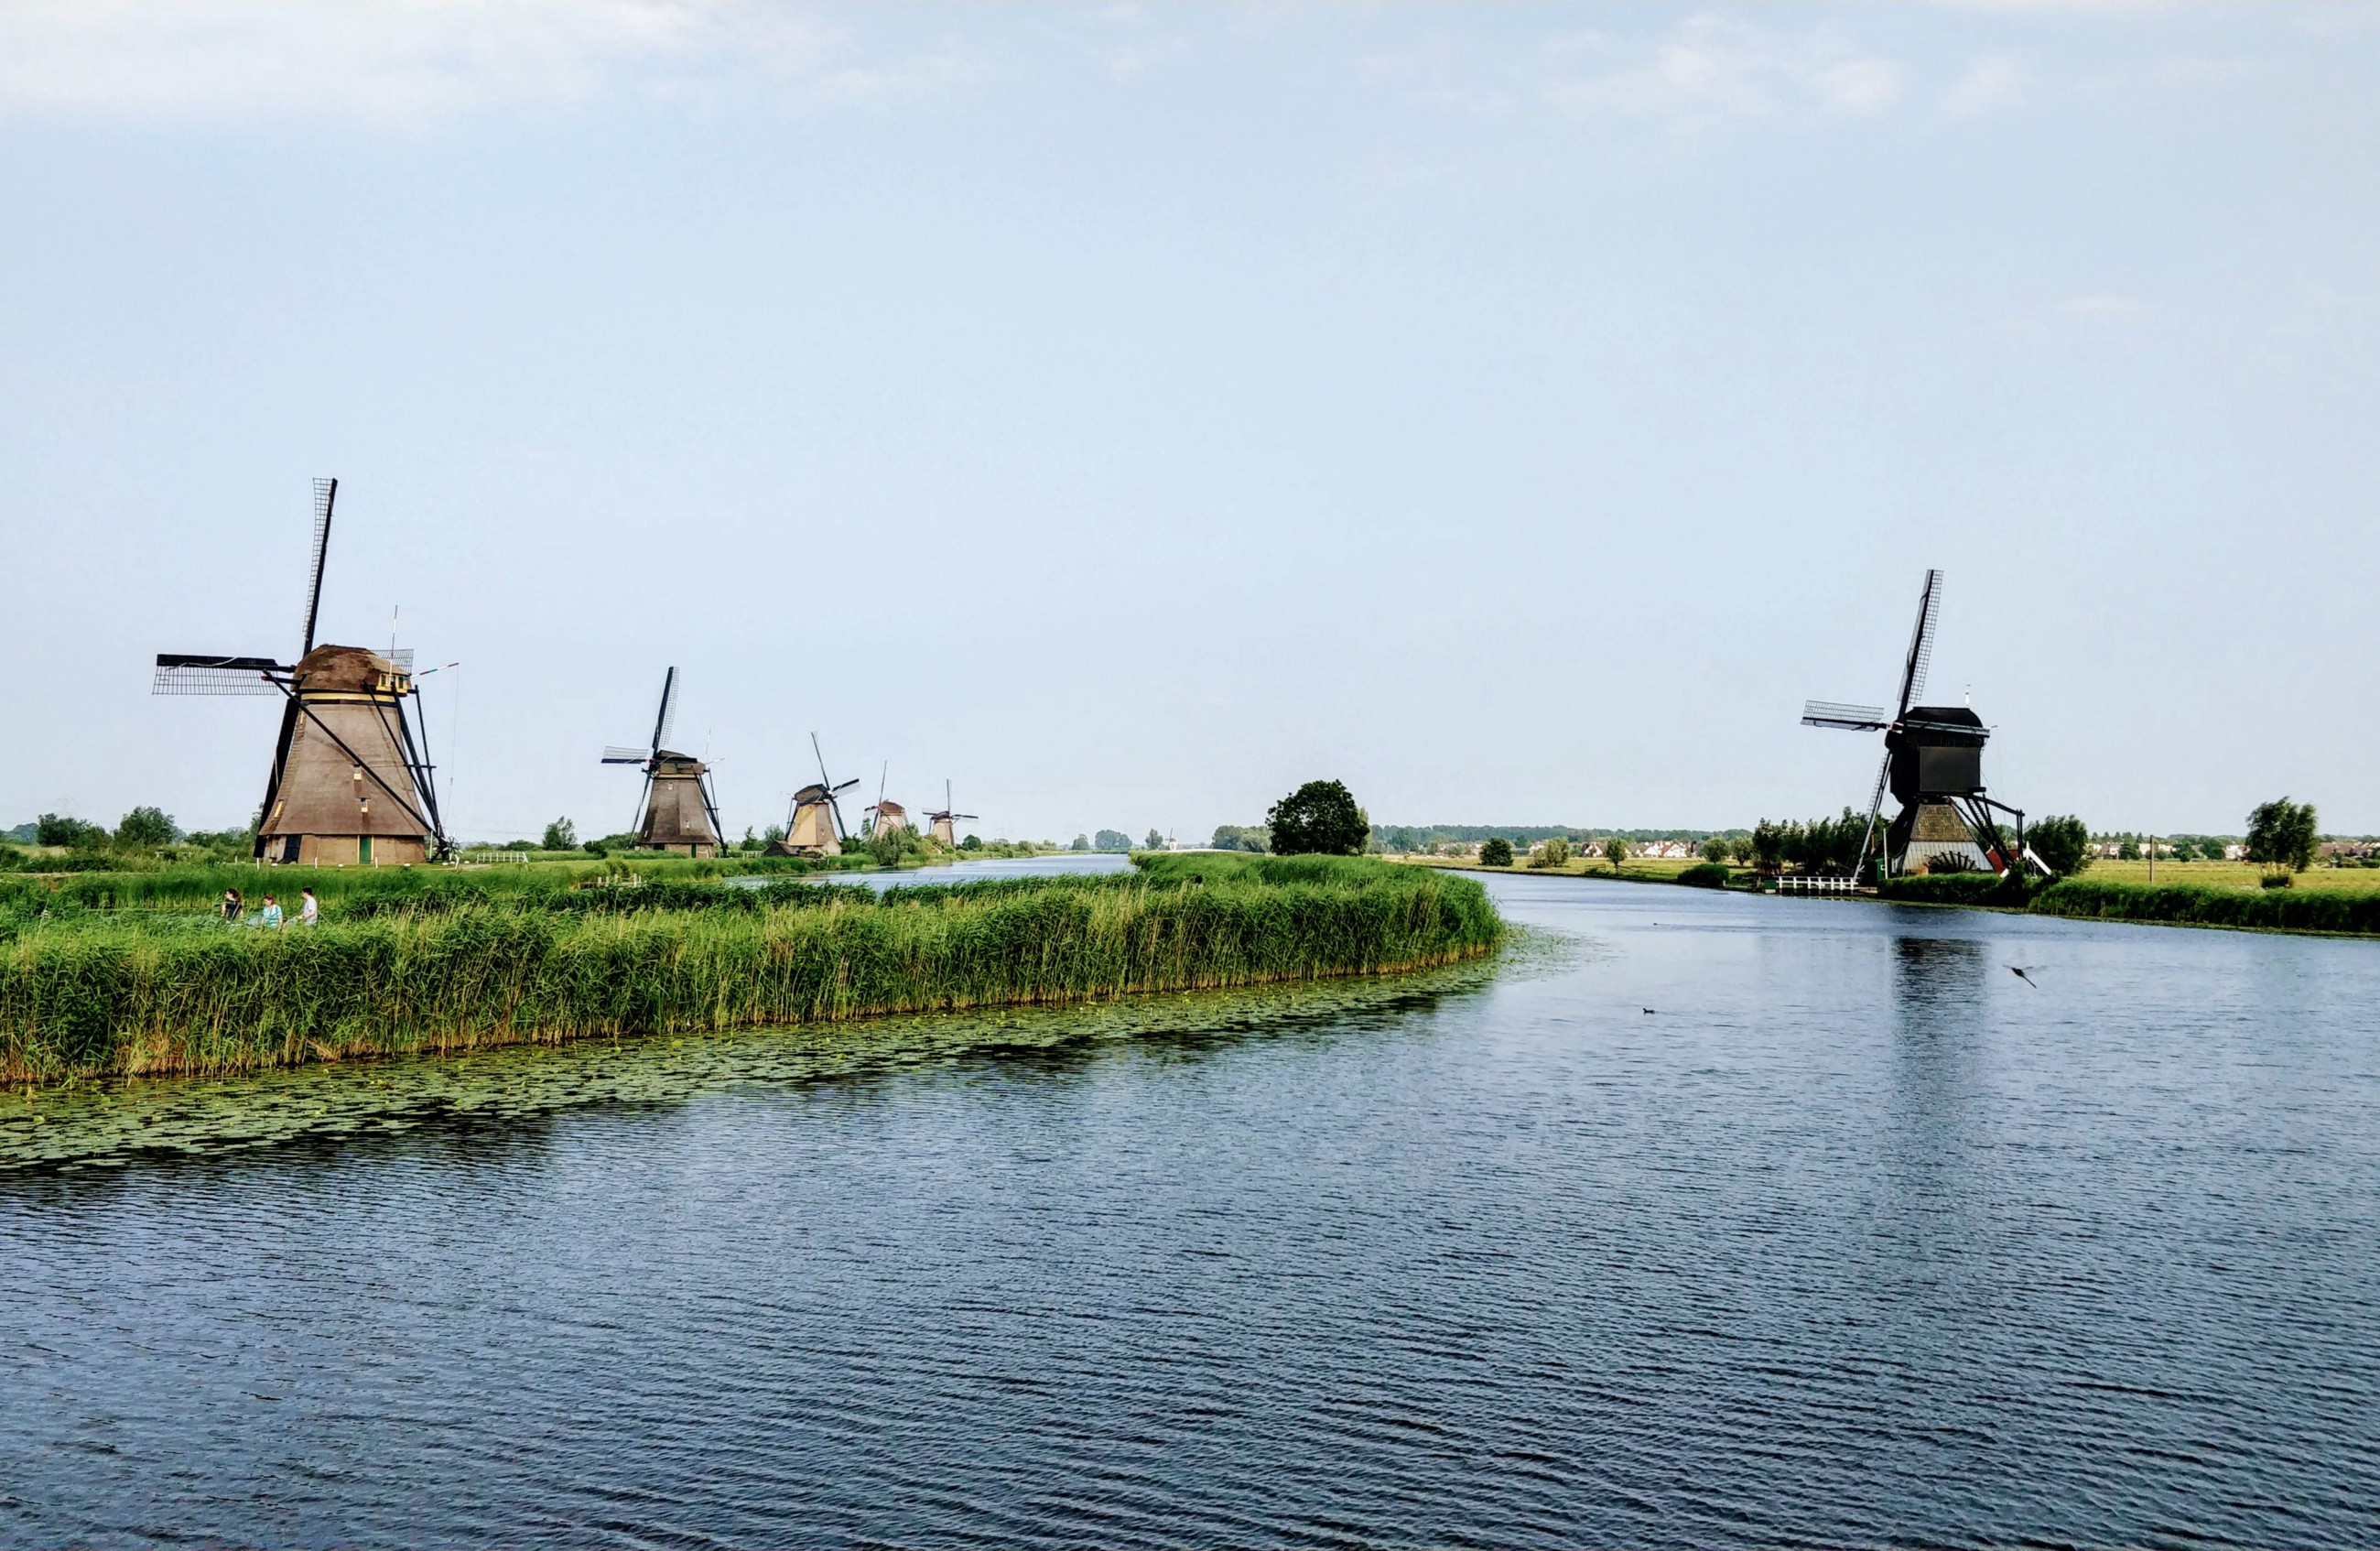 Photo called 'It’s Own Kind of Tranquility', displaying a series of windmills on either side of a 'water street (canal)' in Alblasserdam, The Netherlands